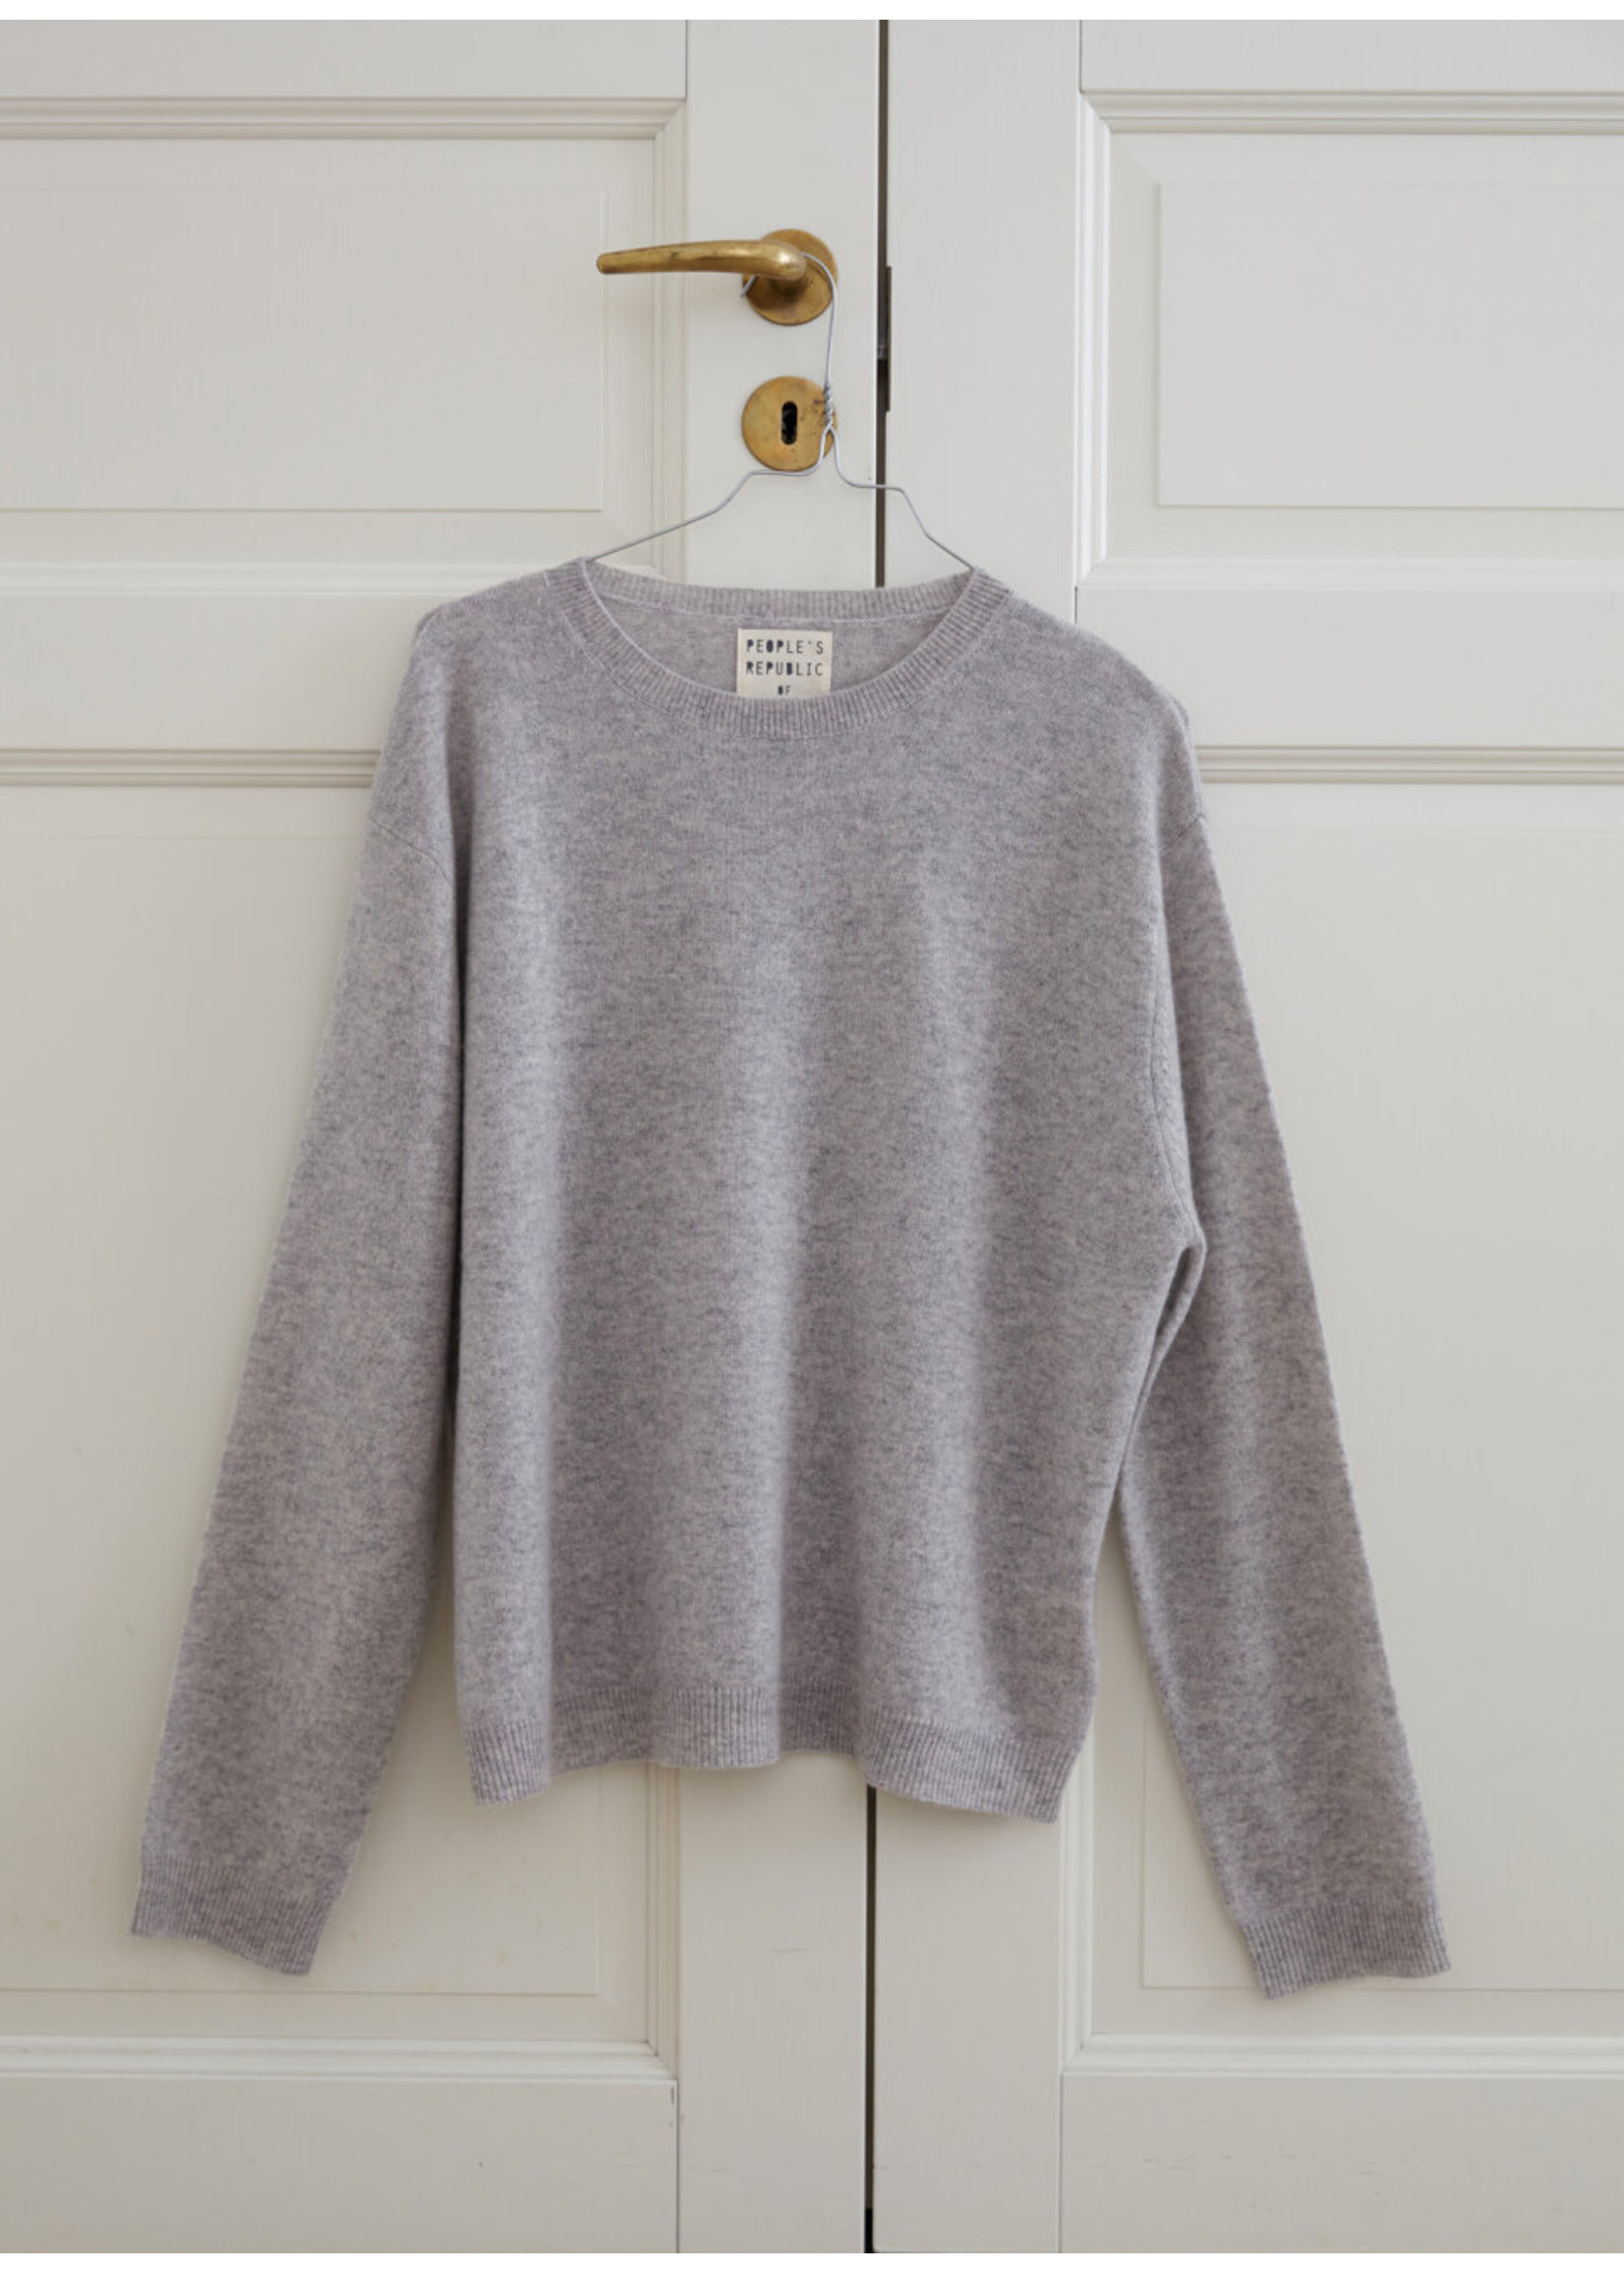 People's Republic of Cashmere Women's Boxy O-Neck Ash Grey